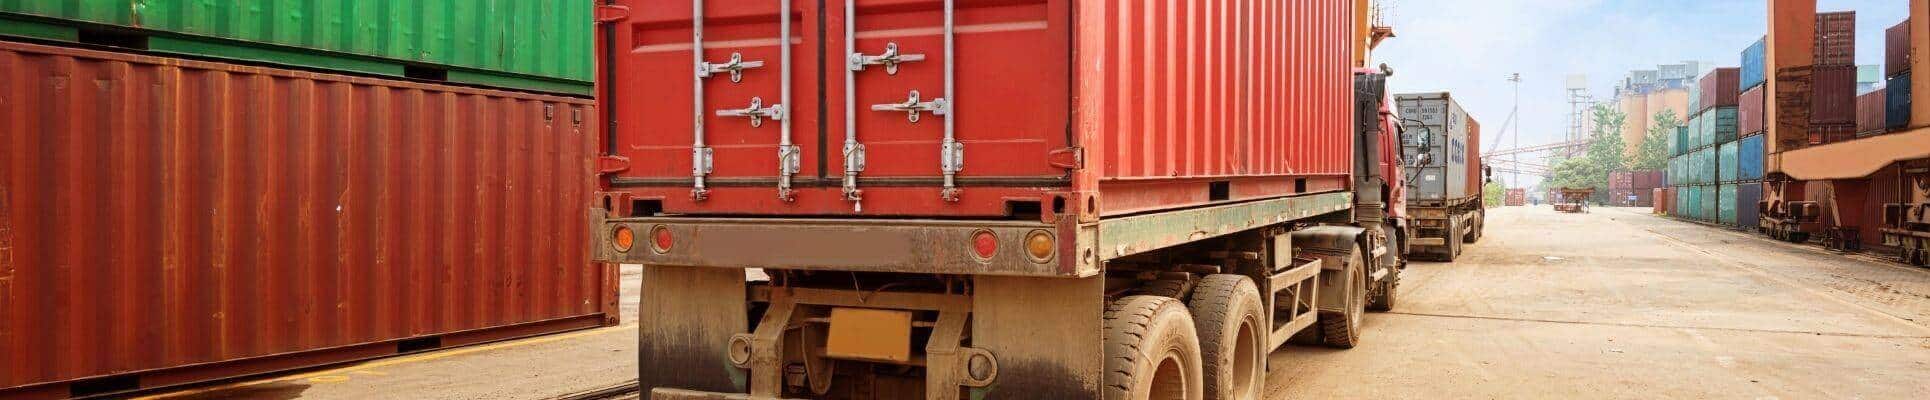 Regulations for Securing Intermodal Containers